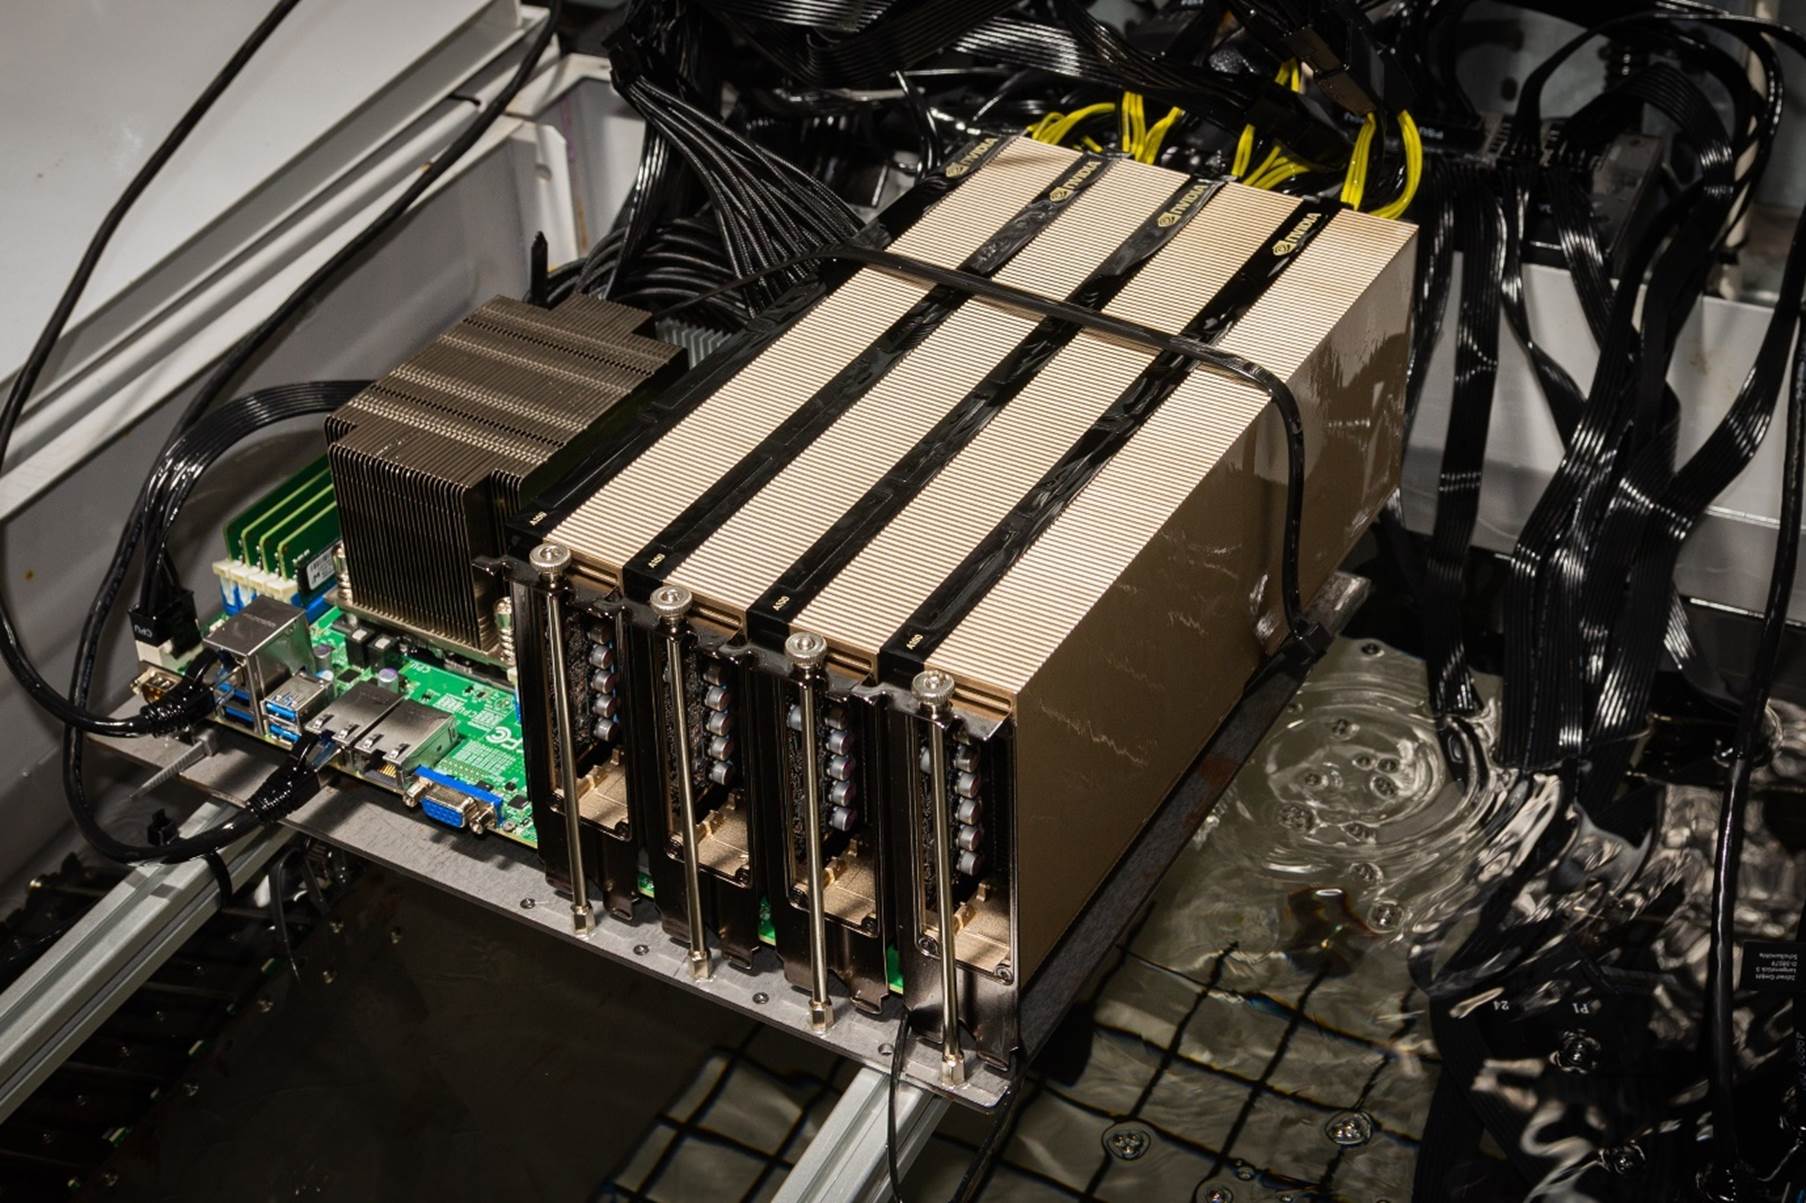 Deep Green’s computers are submerged in mineral oil that captures waste heat.